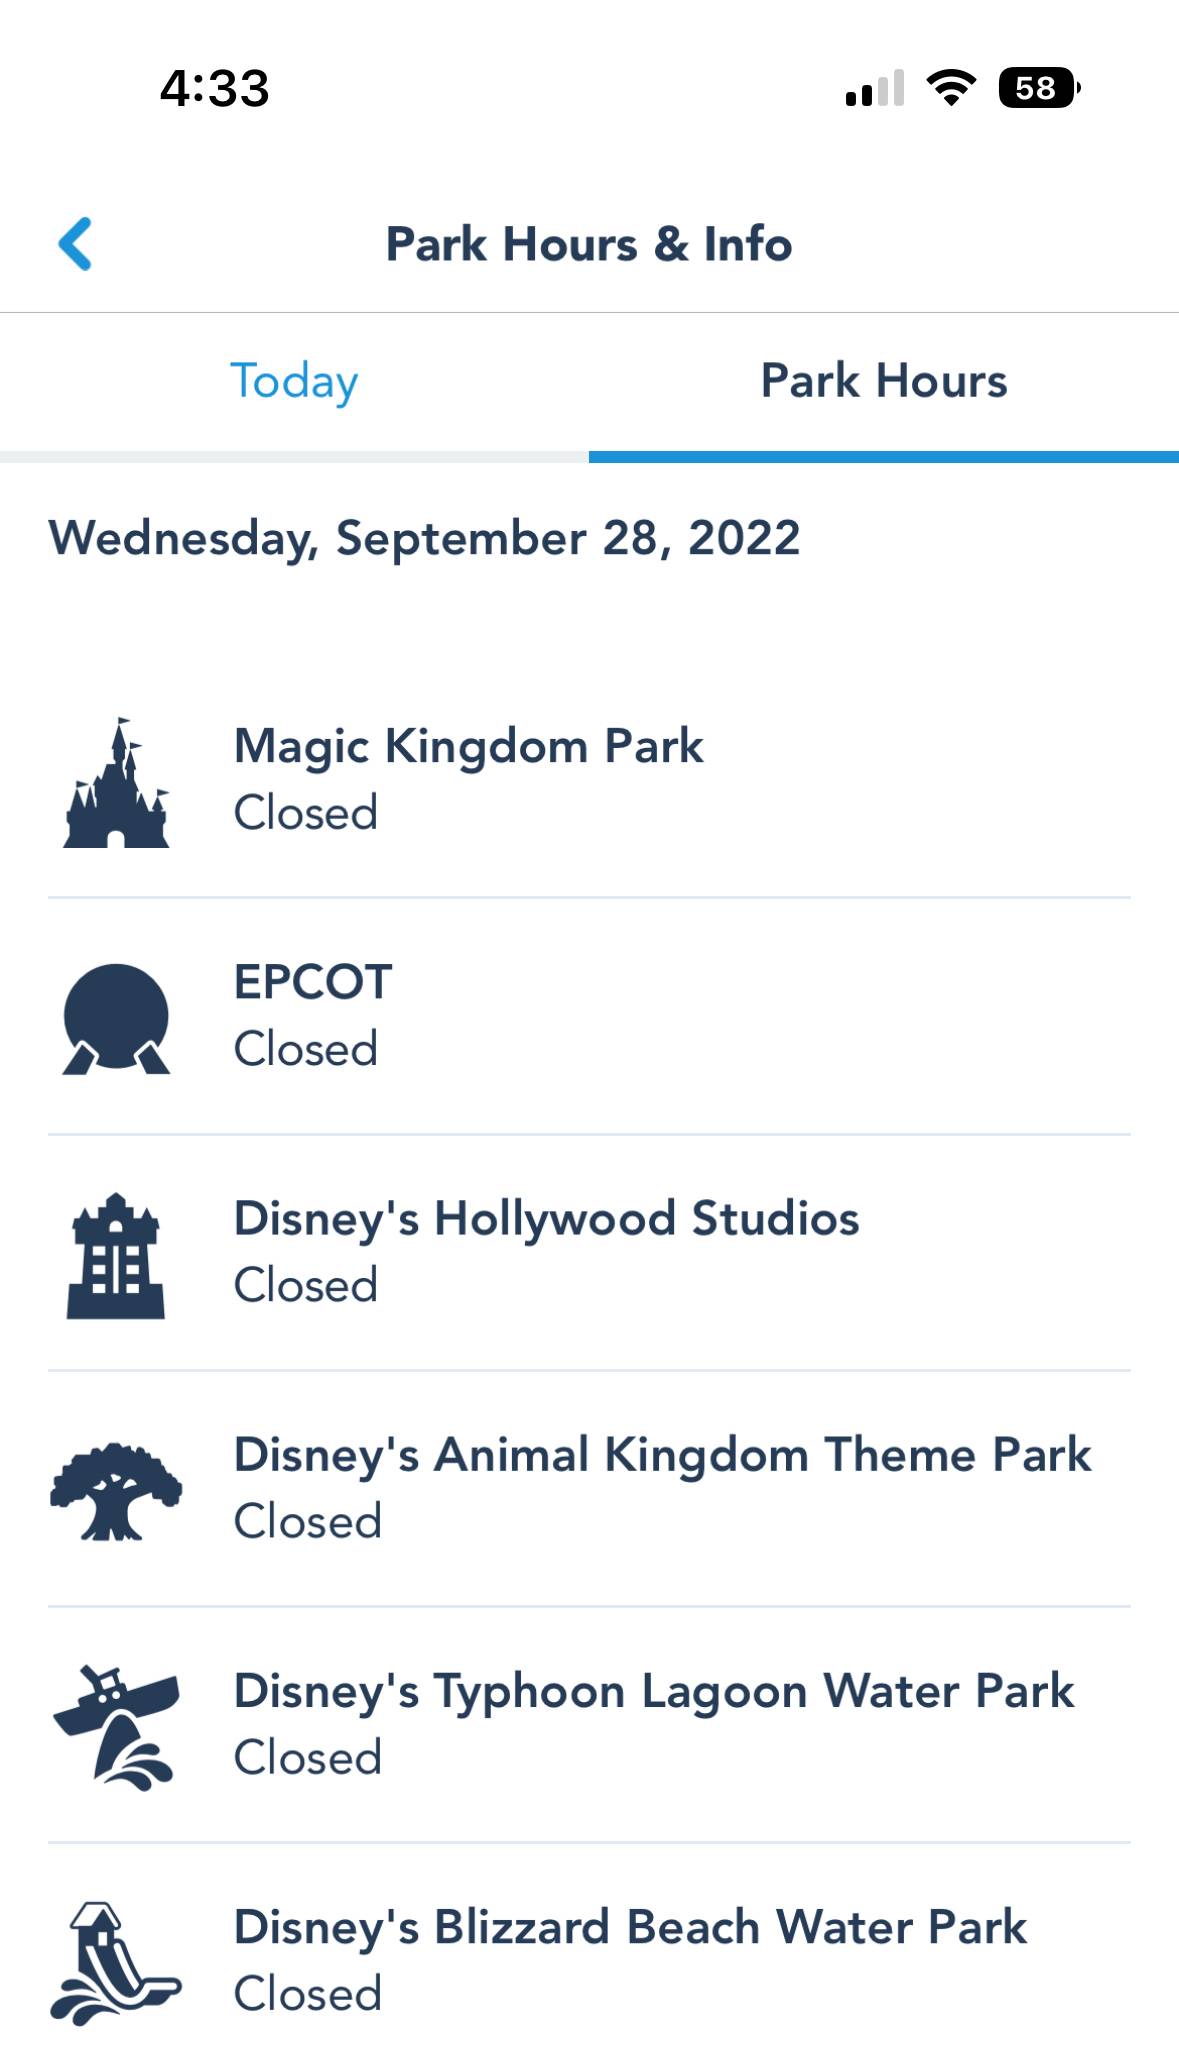 Disney outlines resort check-in times and offerings at its Walt Disney World hotels during Hurricane Ian